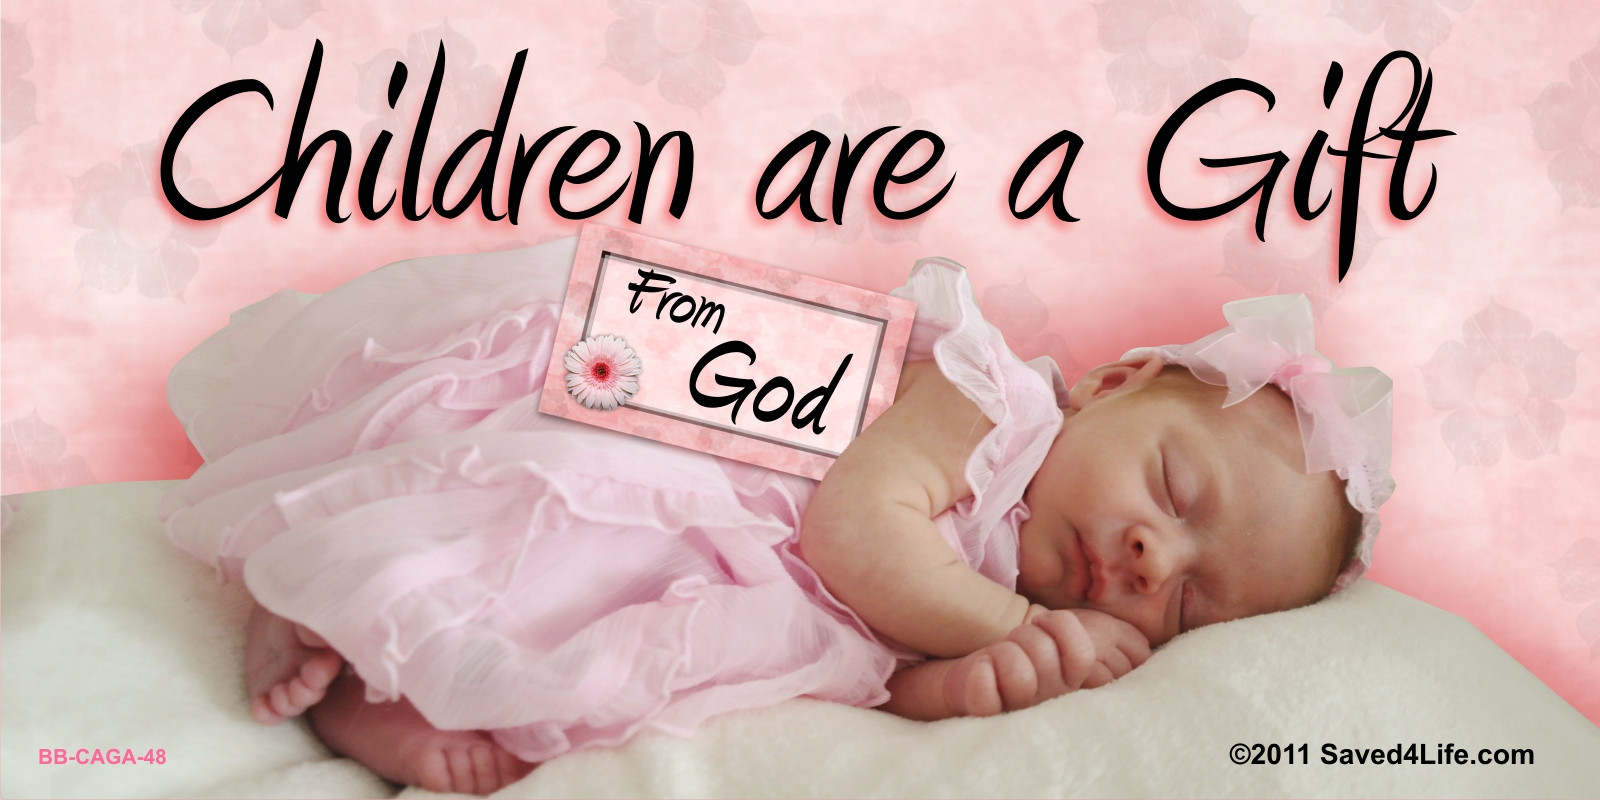 Children Is A Gift From God
 Just saw a gem of a bumper sticker childfree